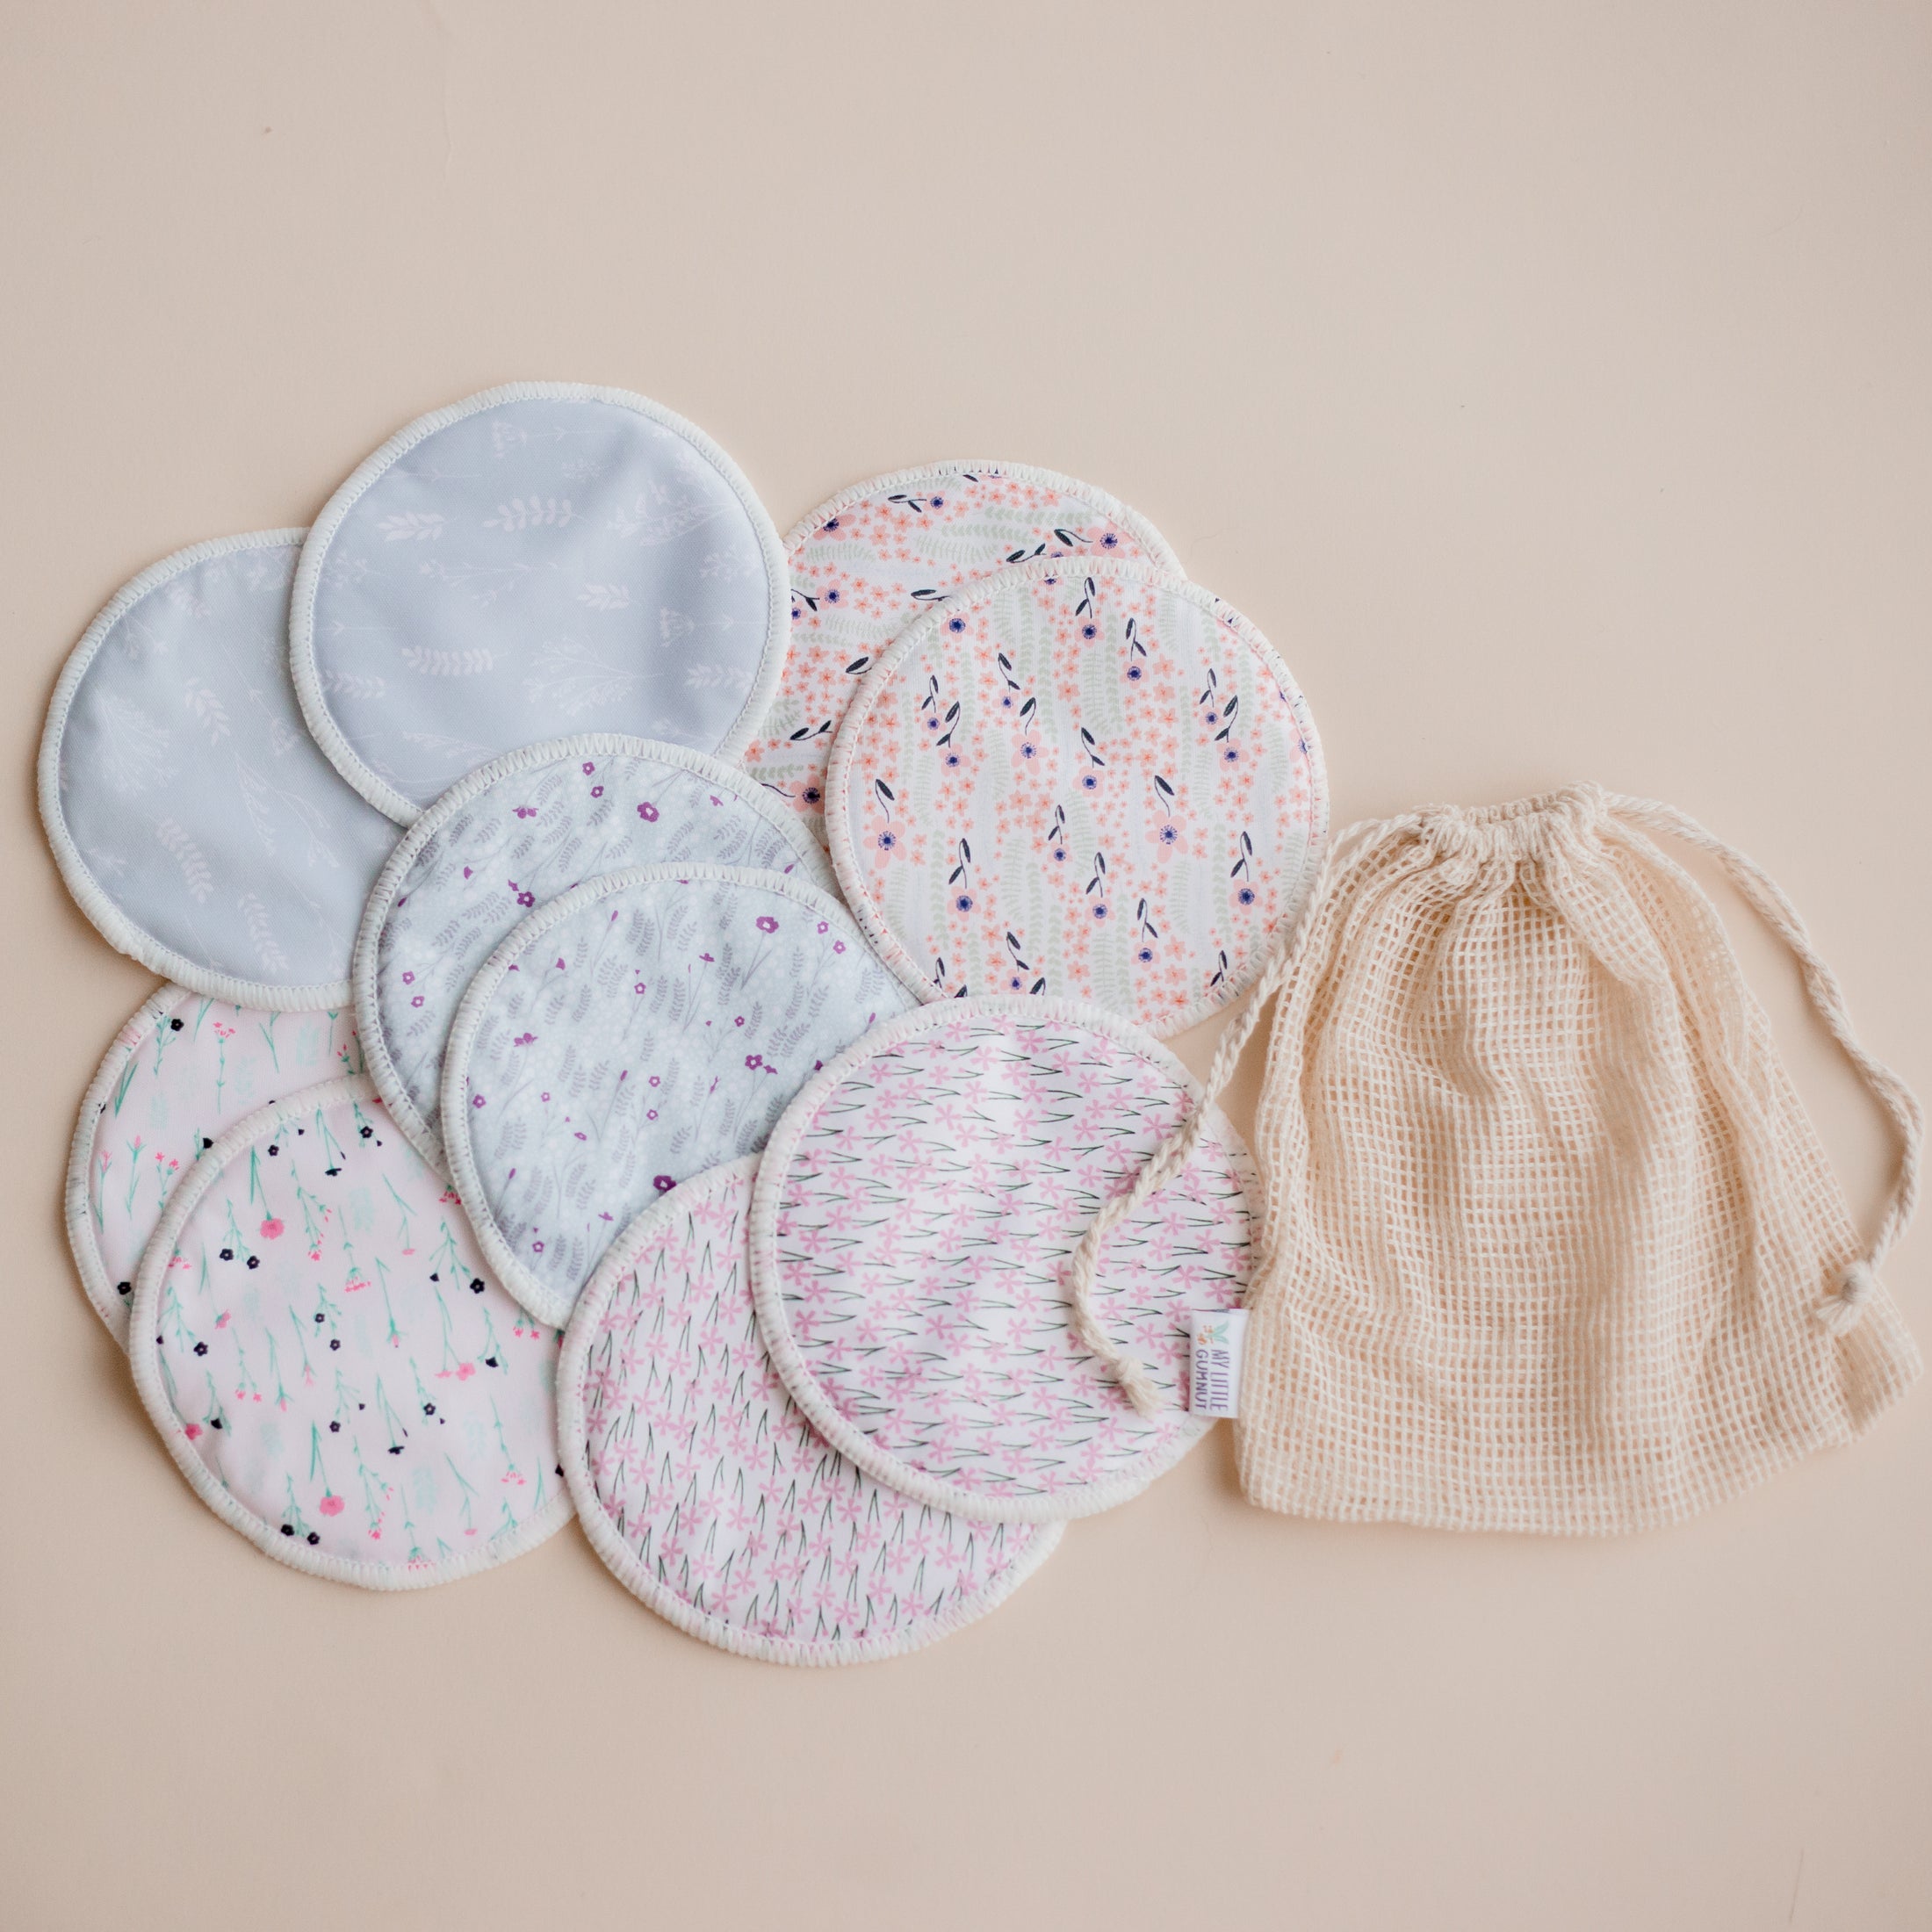 Disposable Nursing Pads Breathable Breast Feeding Pads Soft Disposable  Breast Pads for Women - China Soft Disposable Breast Pads and Breathable Breast  Feeding Pads price